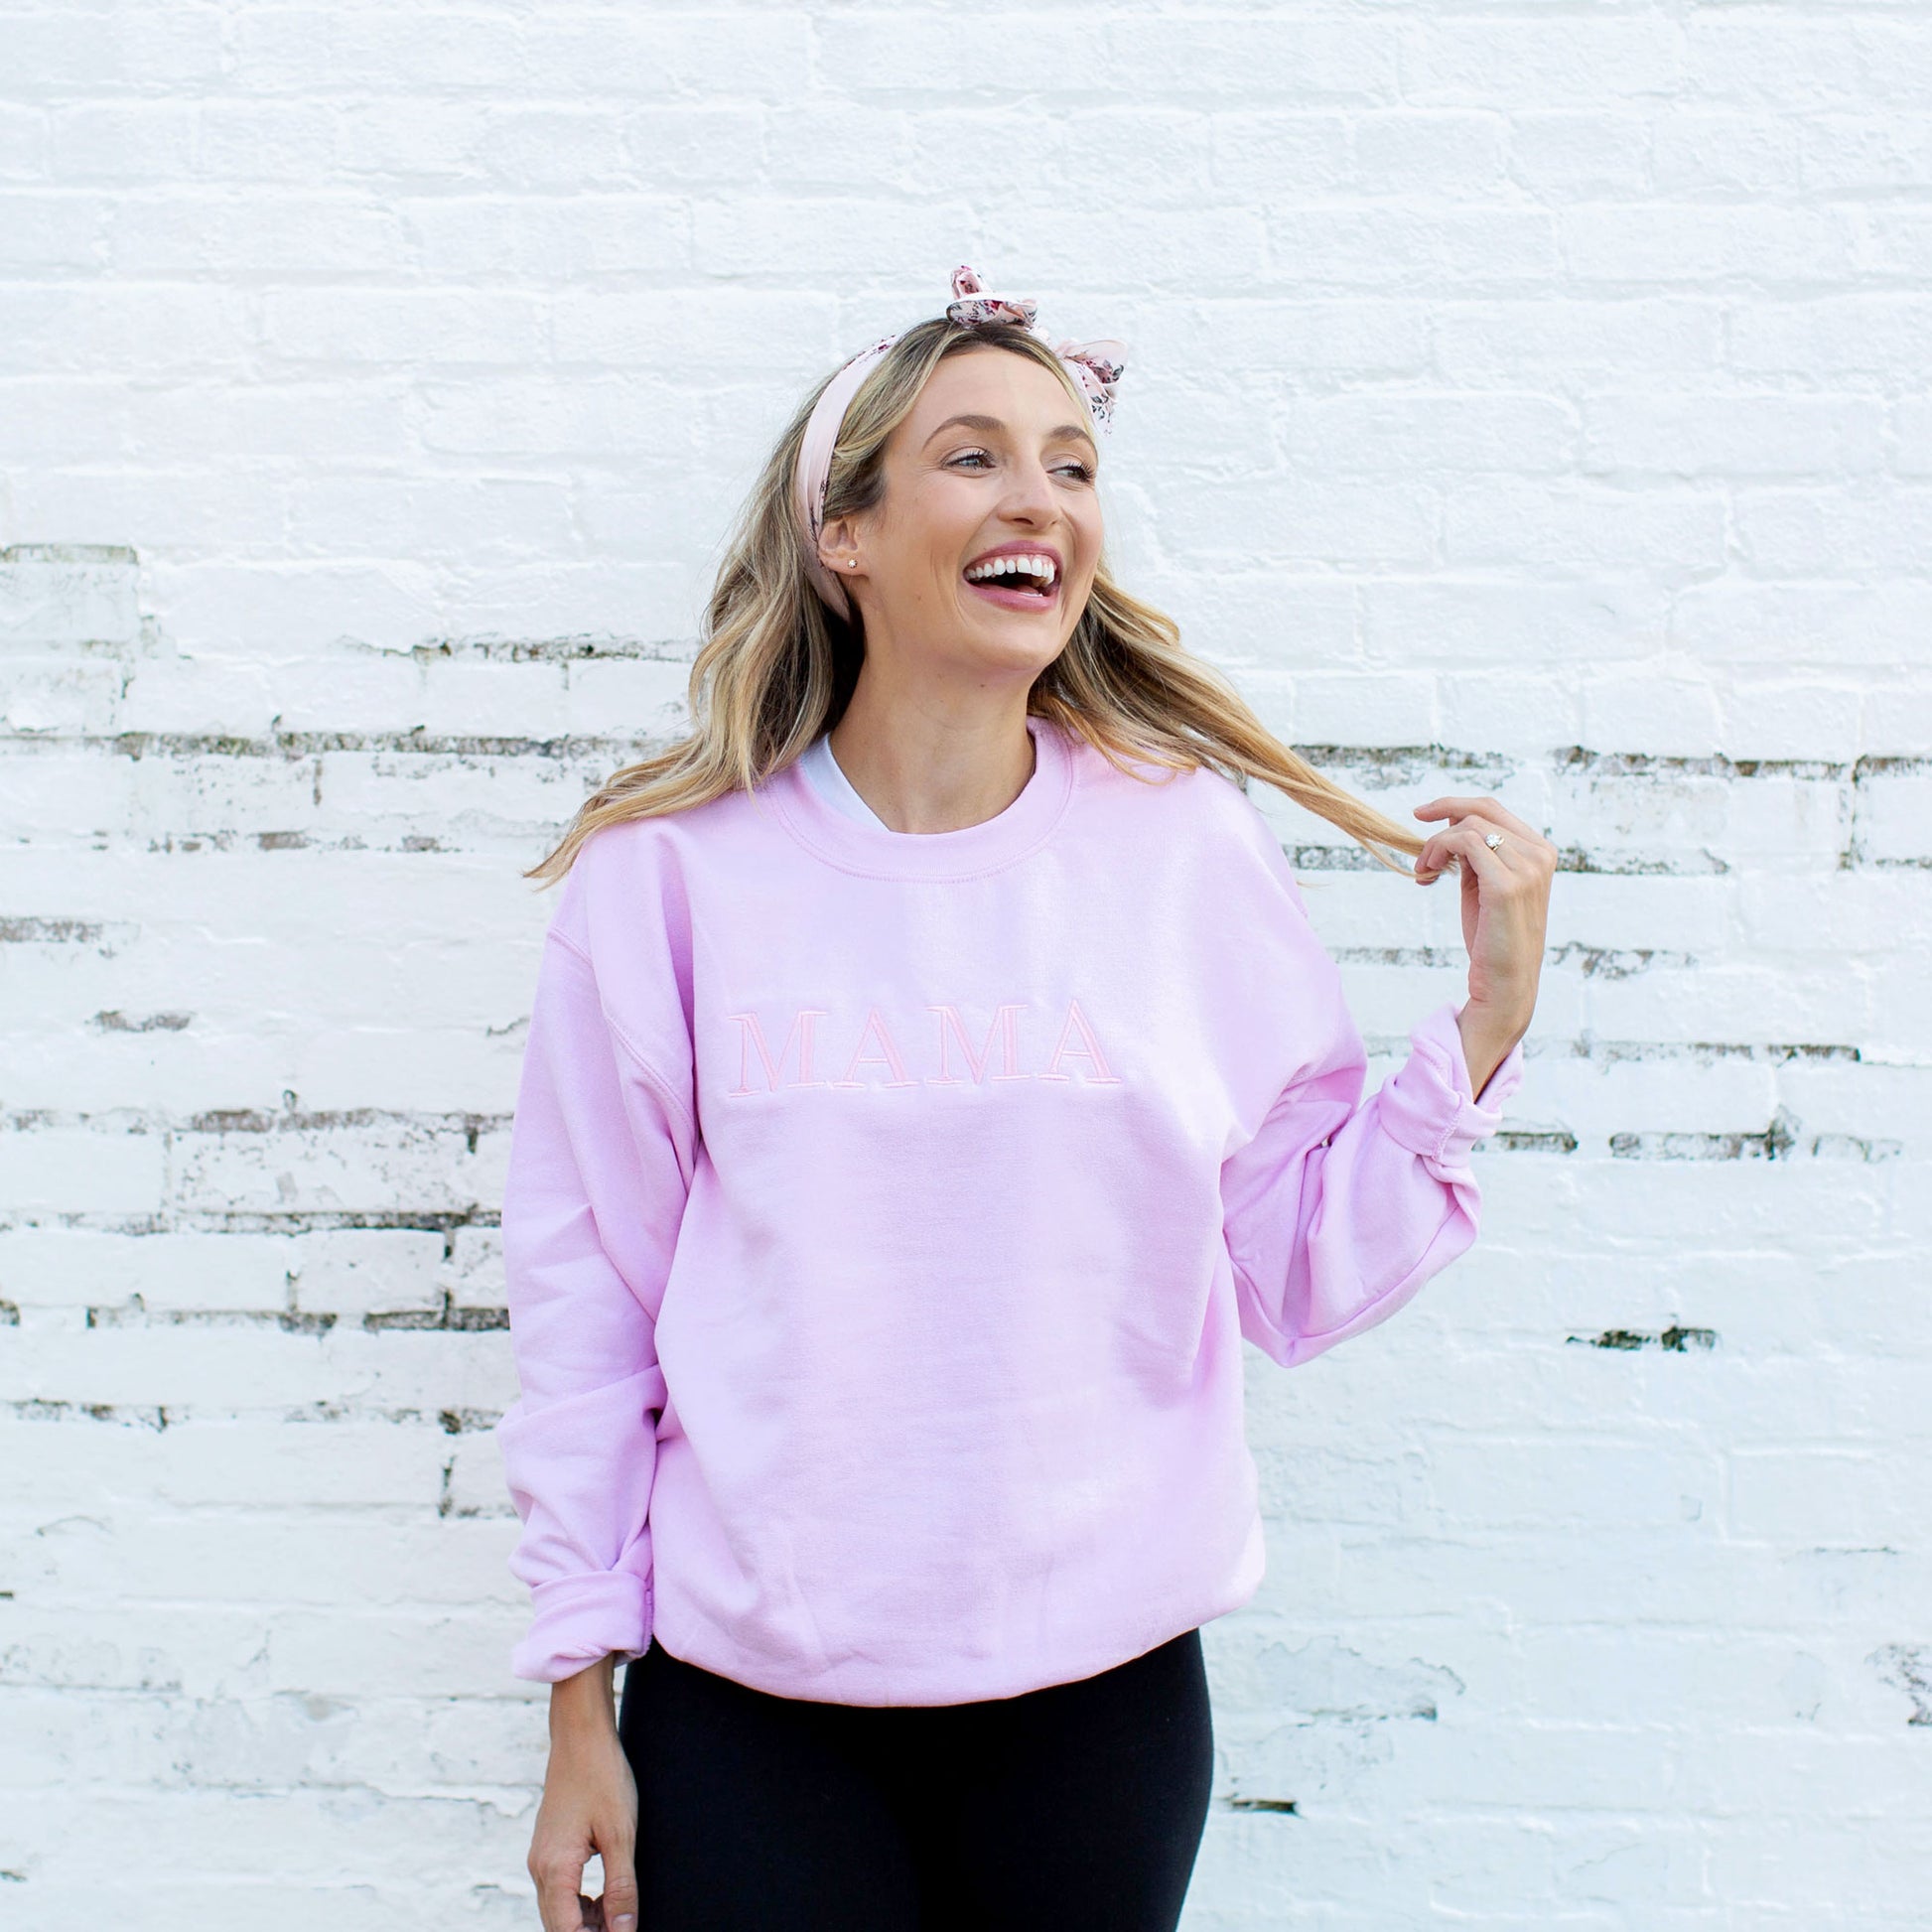 young woman modeling a light pink crewneck sweatshirt with embroidered MAMA in all caps and in baby pink thread across the chest